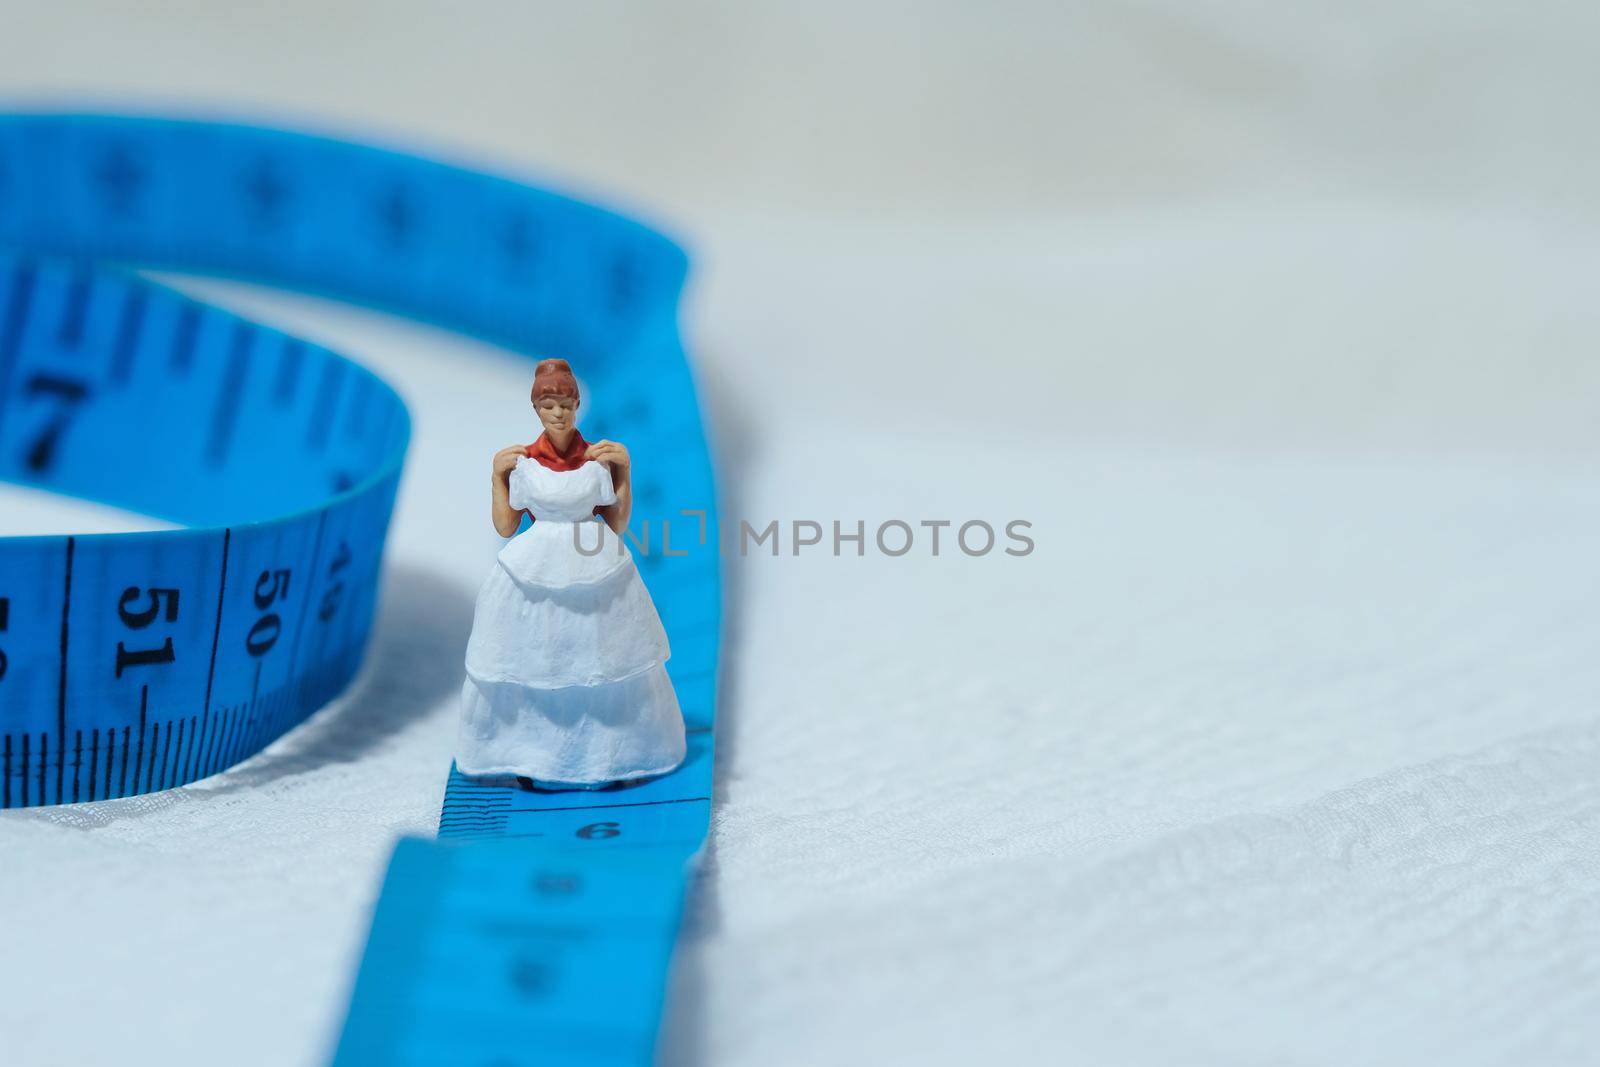 Women miniature people standing above measuring tape to fix her wedding dress. Image photo by Macrostud